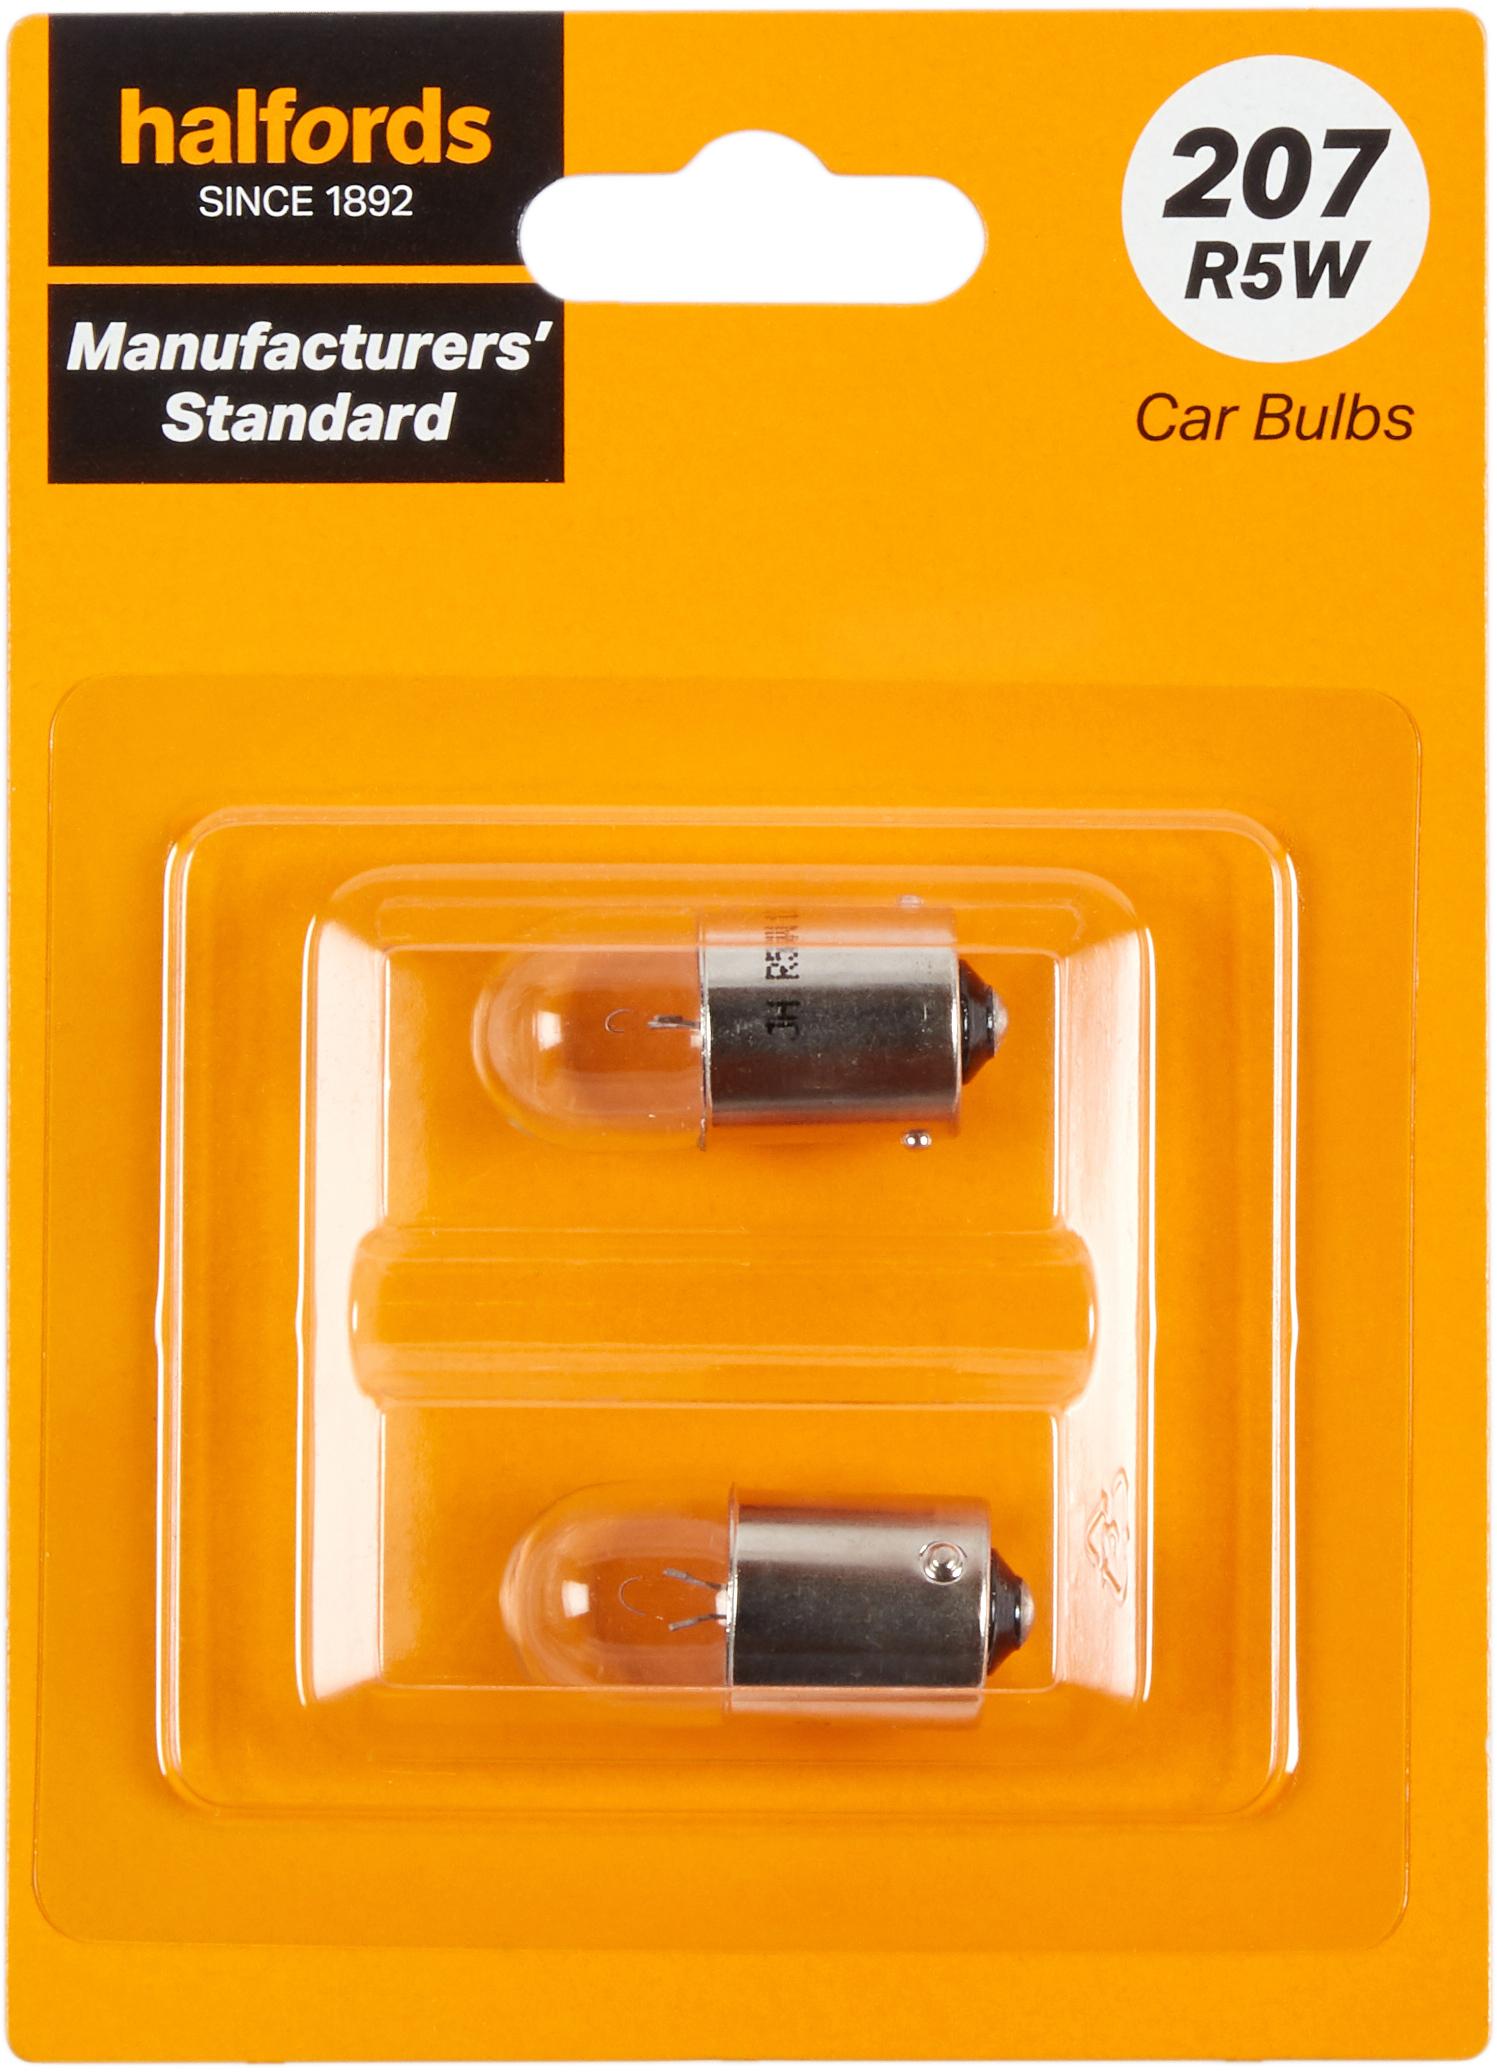 207 R5W Car Bulb Manufacturers Standard Halfords Twin Pack